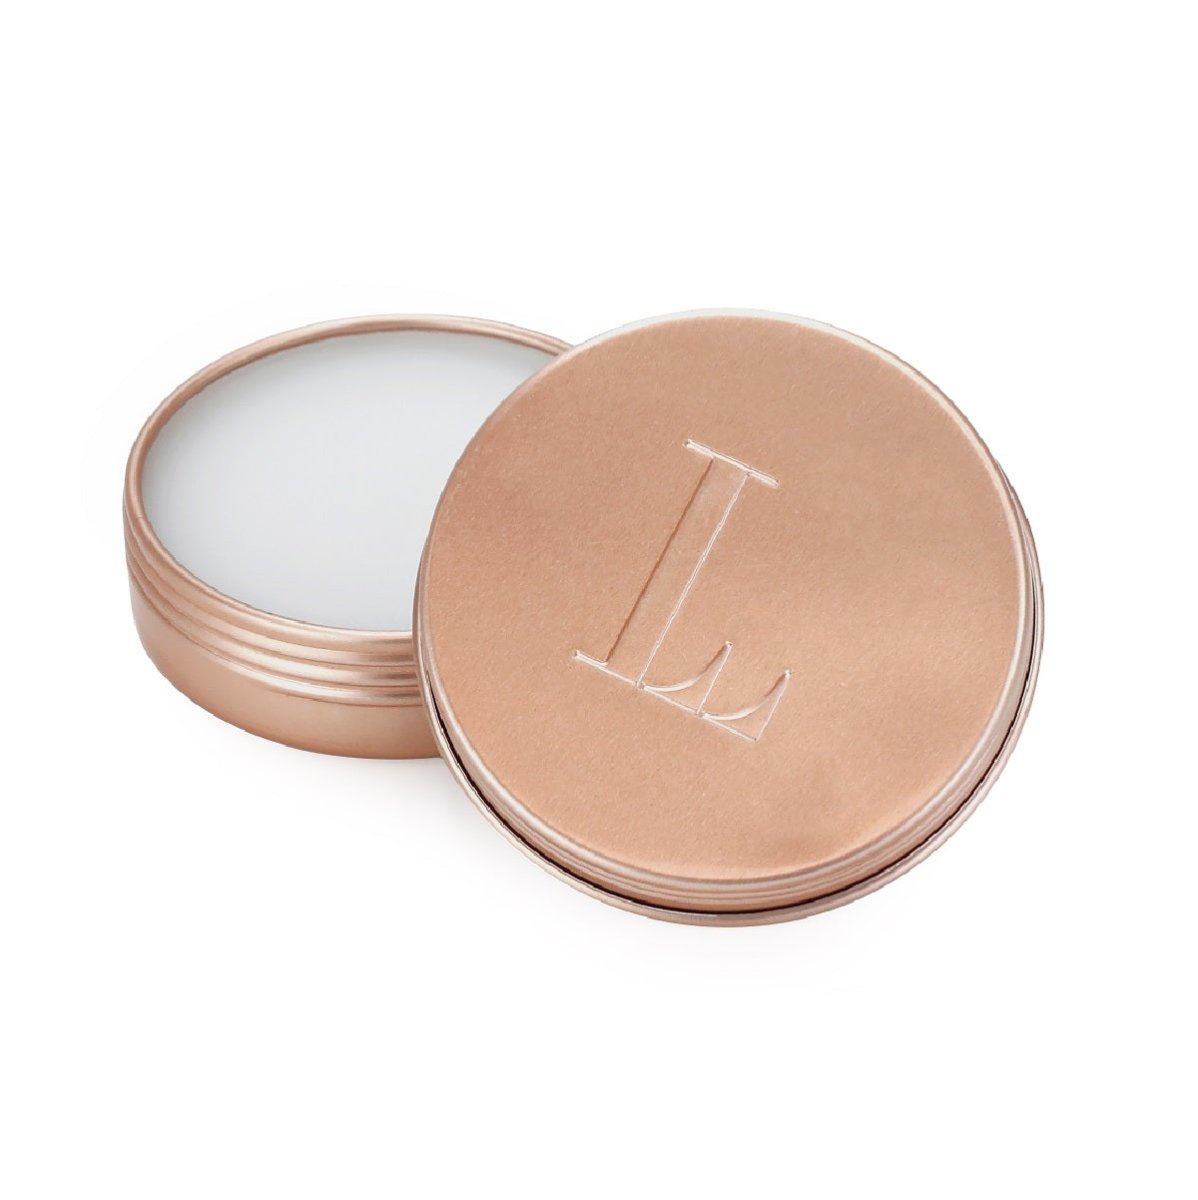 Makeup Cleansing Balm - Lola's Lashes